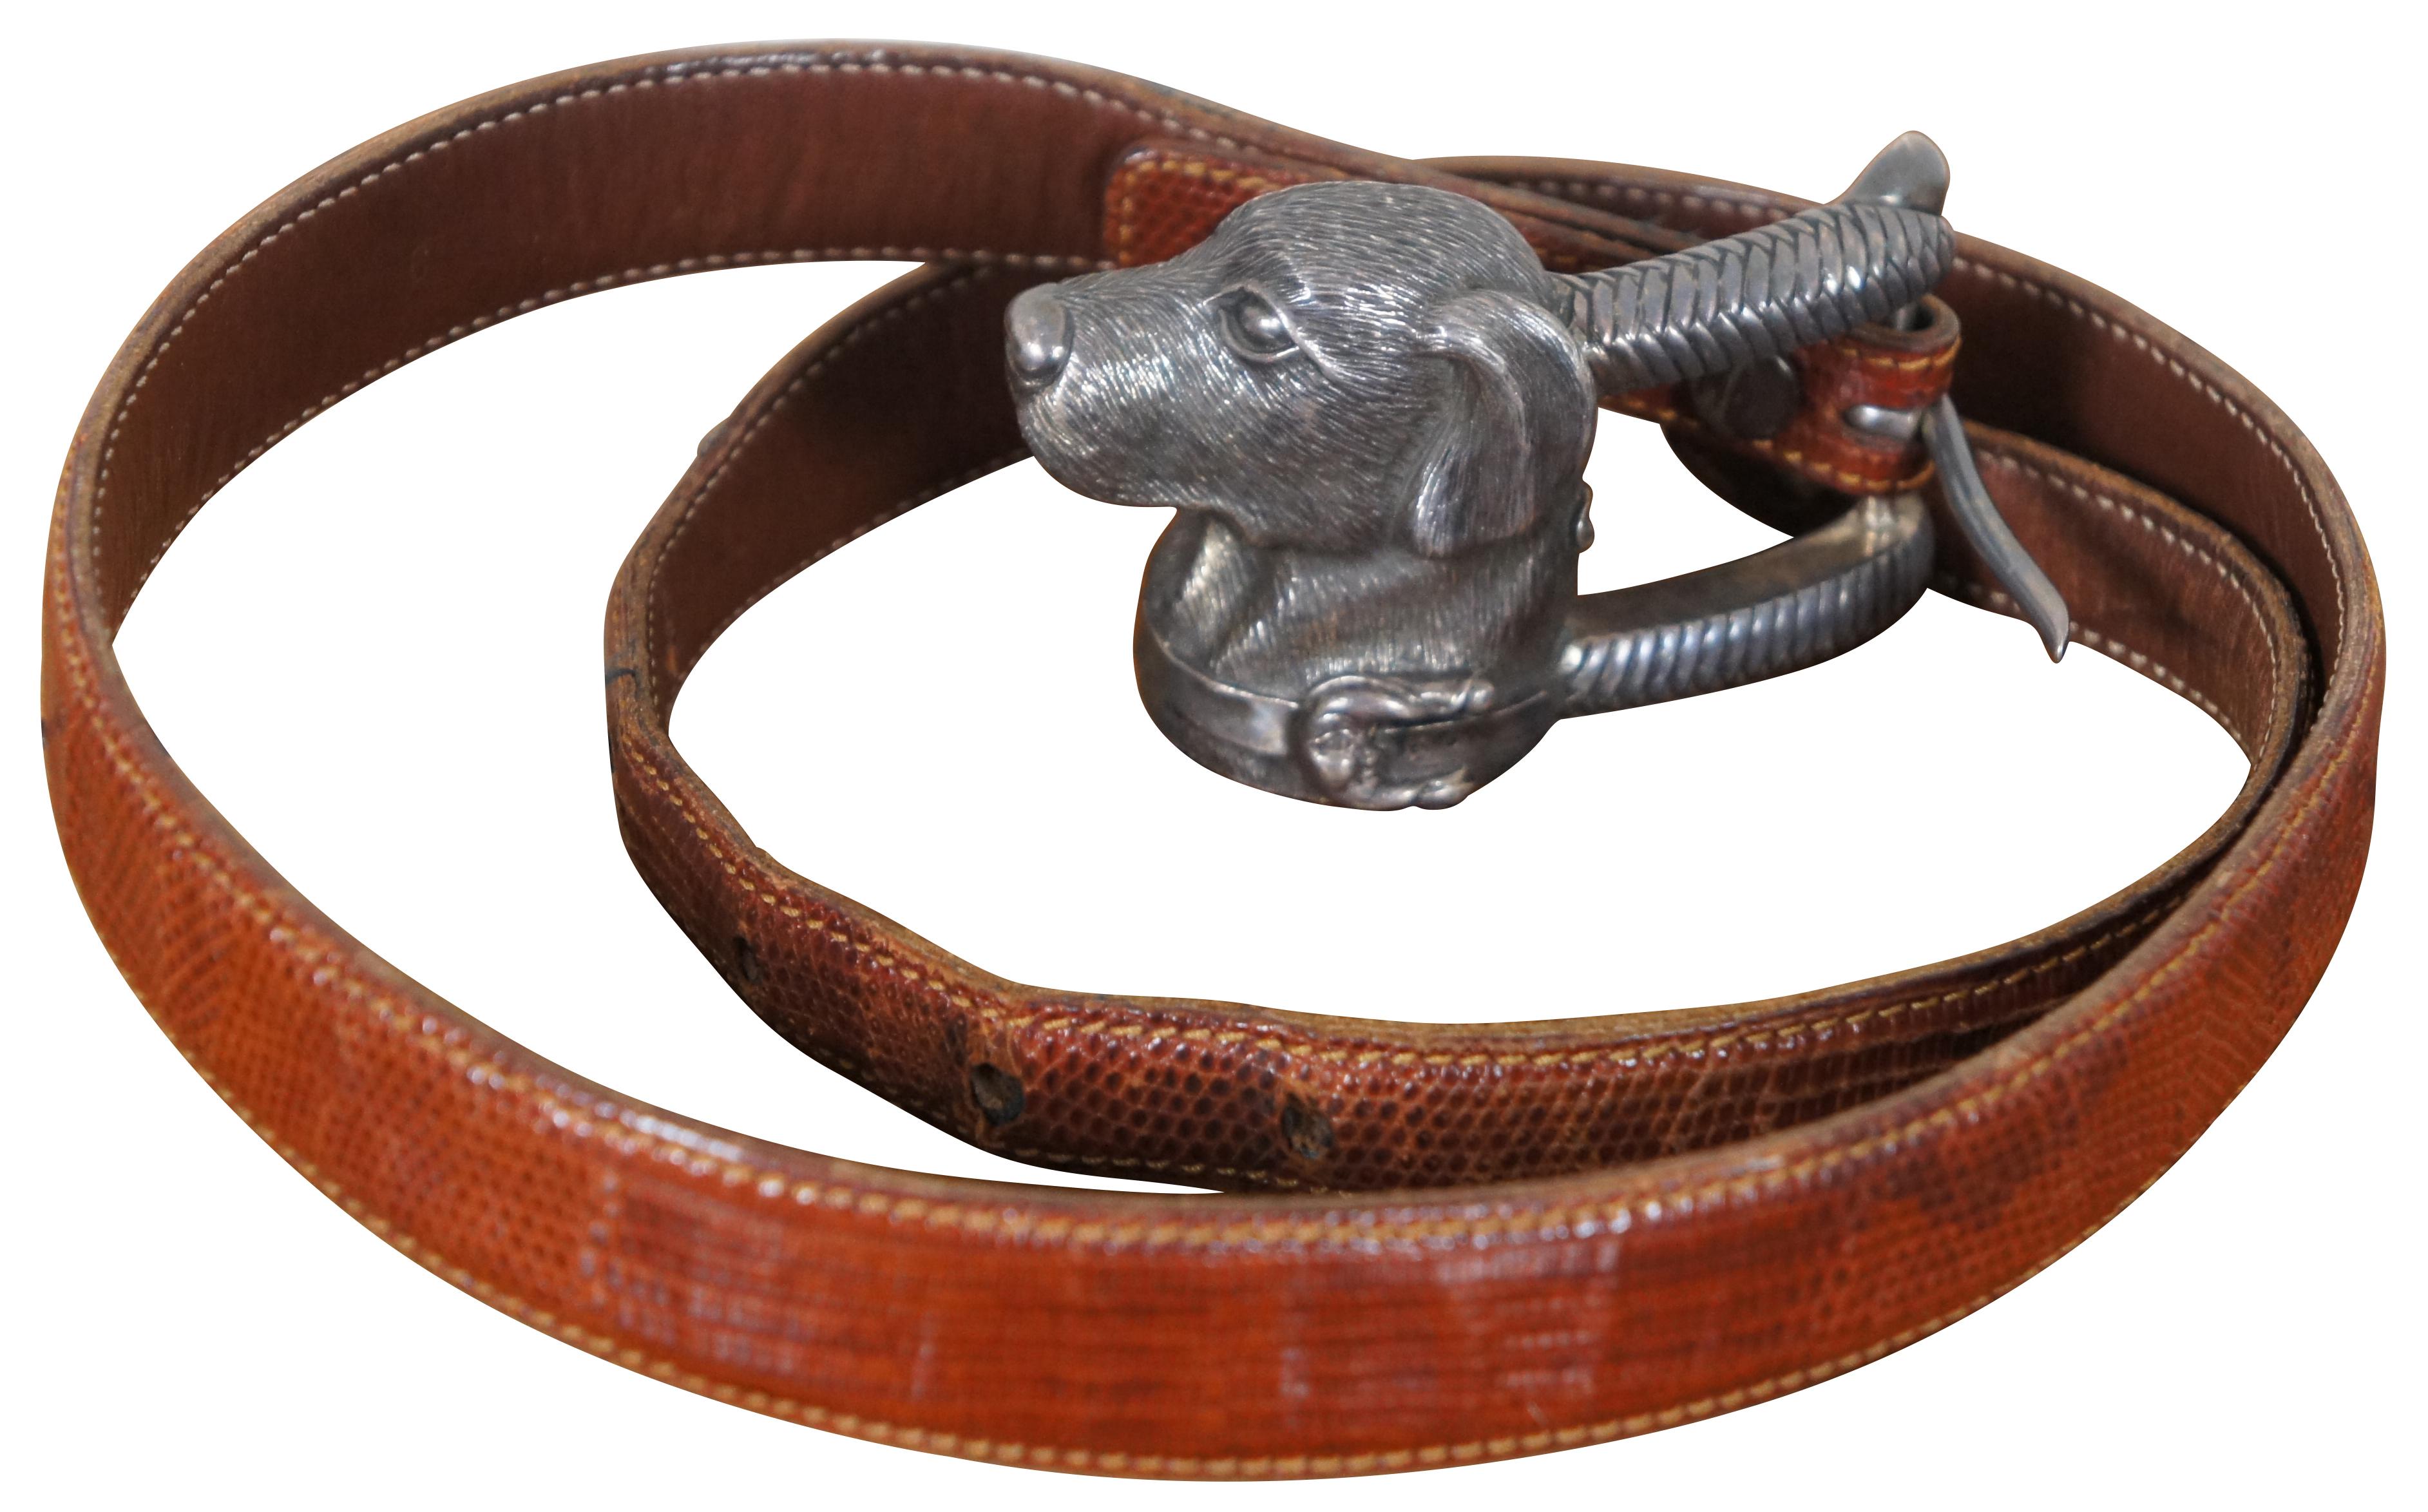 Vintage Barry Kieselstein-Cord brown genuine lizard skin belt with sterling silver buckle in the shape of the head of a Labrador wearing a collar decorated with a Man in the Moon, number 327, circa 1989.

Measures: 39” x 1” / Fits - 27.5” to 31.5”